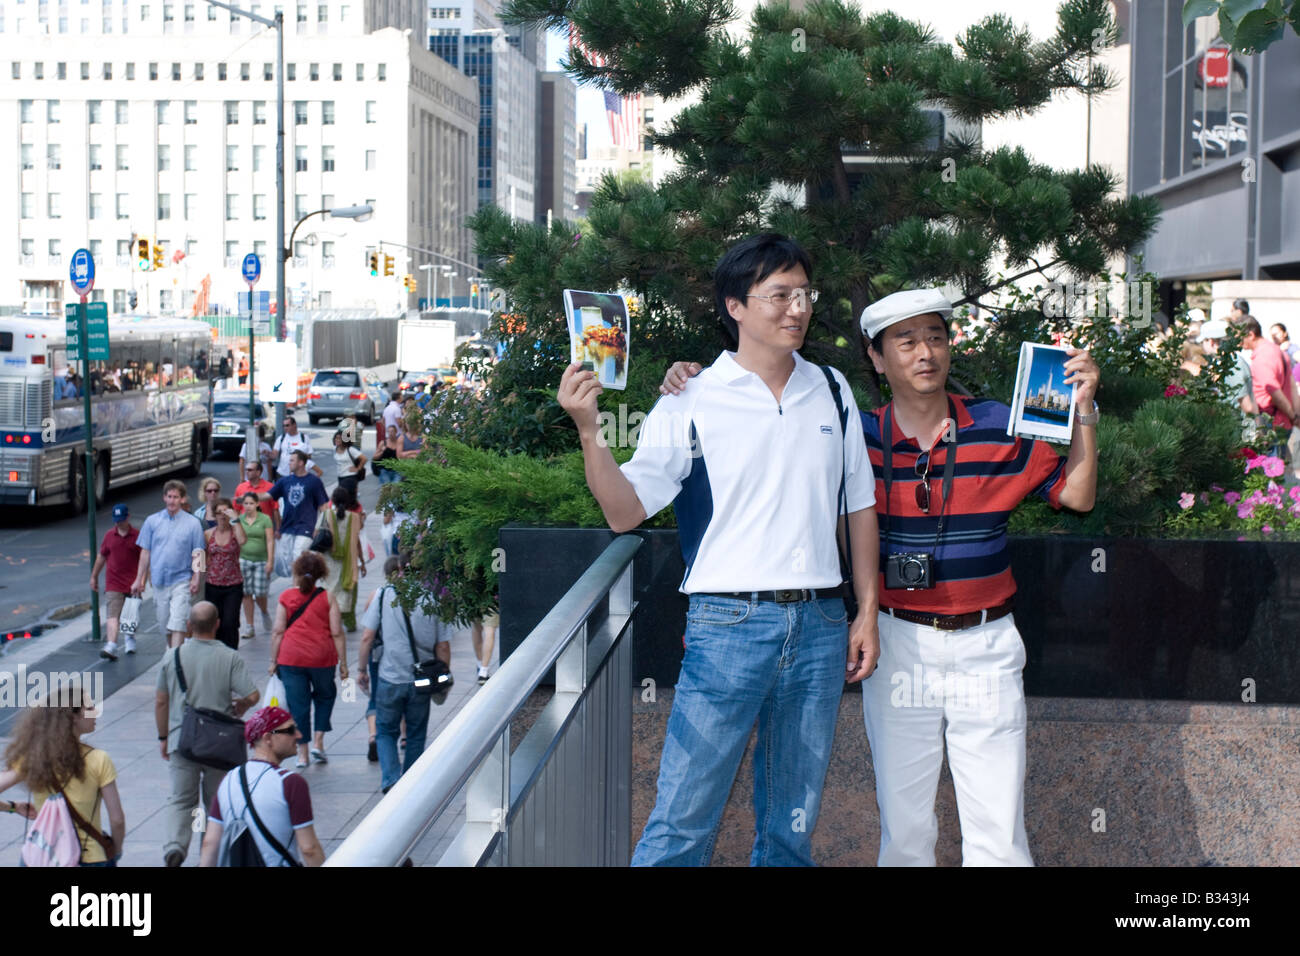 Two tourists smile and hold up pictures of the World Trade Center attack at the WTC site in Manhattan, NY. Stock Photo